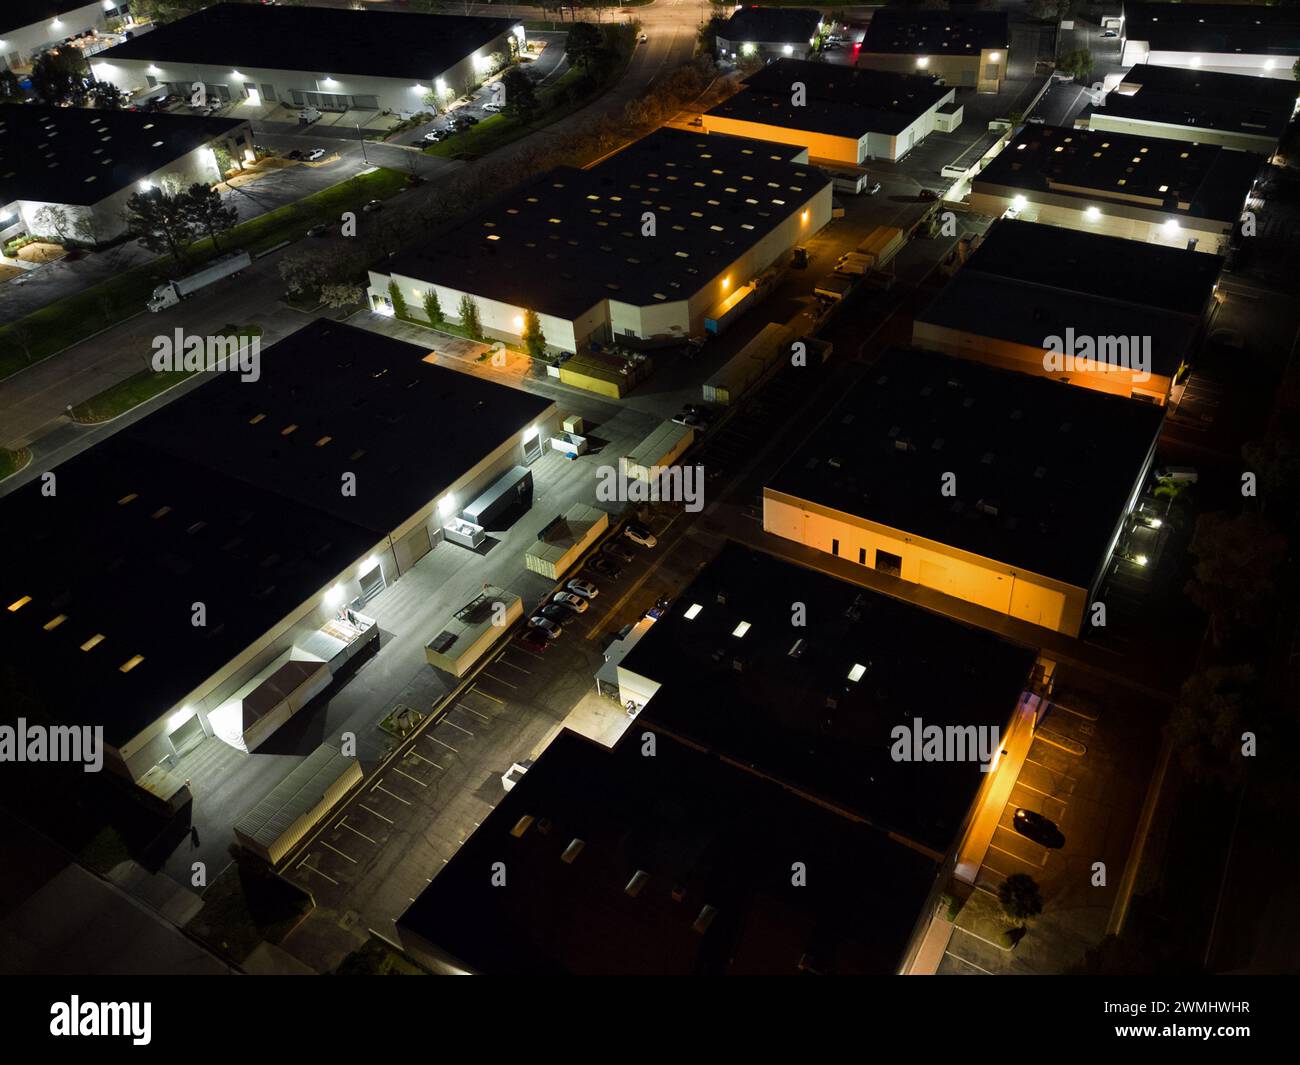 Nondescript warehouses and office buildings of an industrial business park are shown from an overhead view at night. Stock Photo